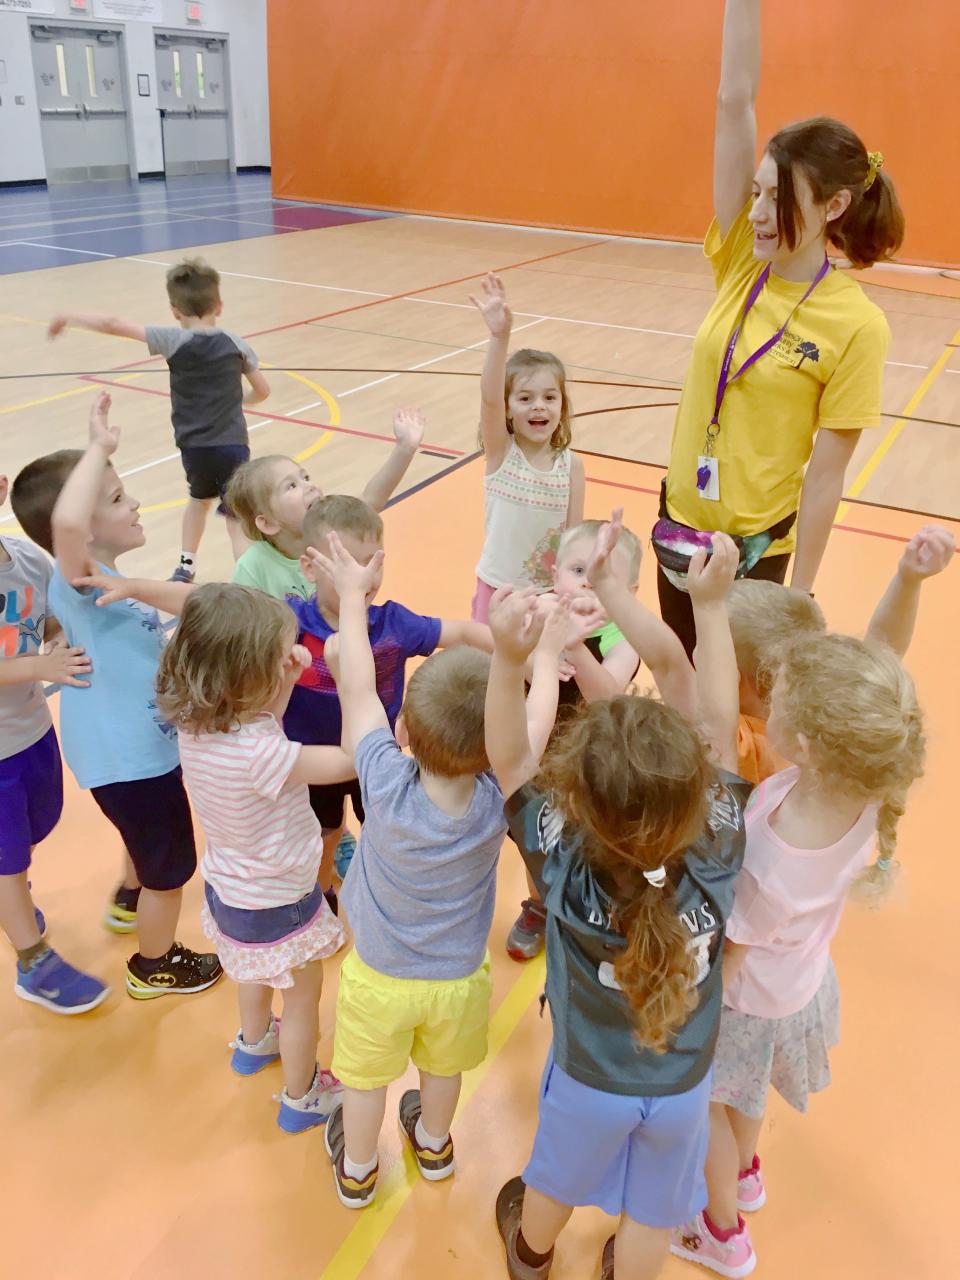 The Jefferson County (W.Va.) Parks and Recreation Commission is hosting summer programs with lots of varied activities this year.